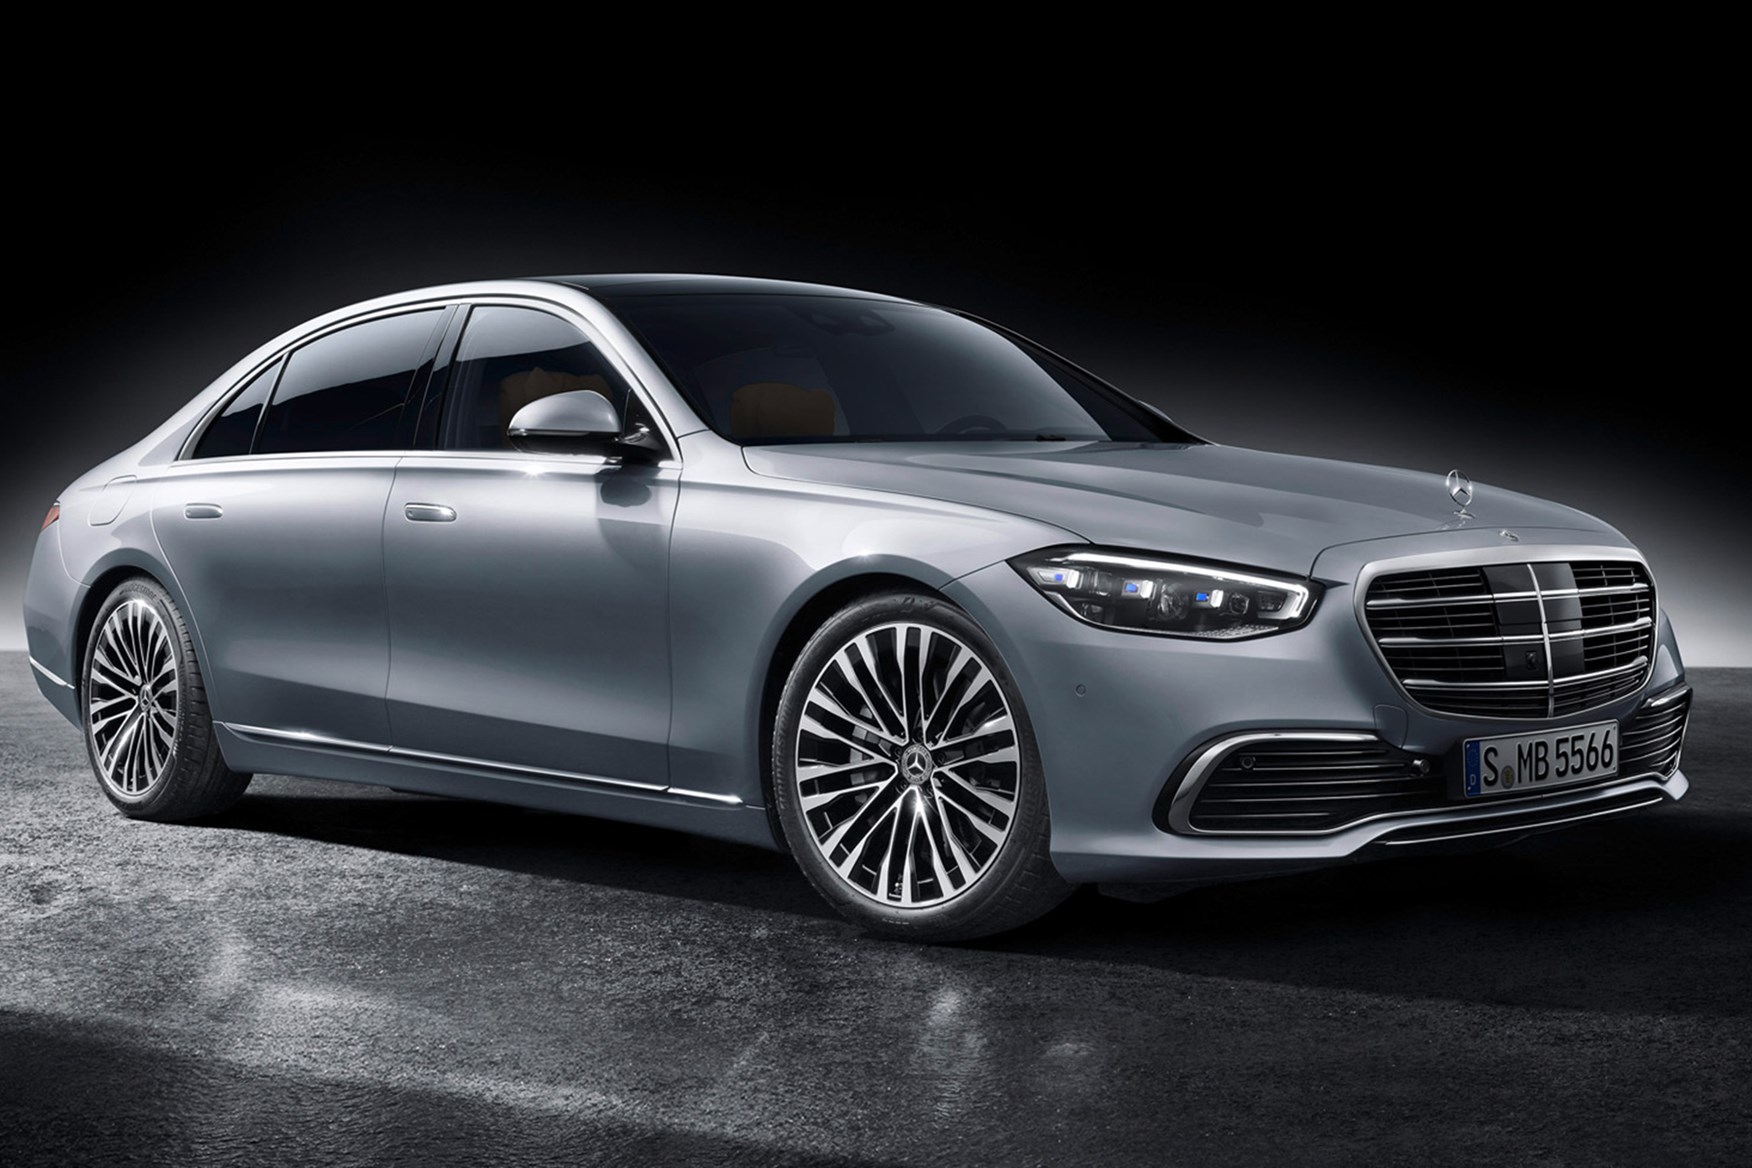 New MercedesBenz SClass full details of new luxury car champ Parkers